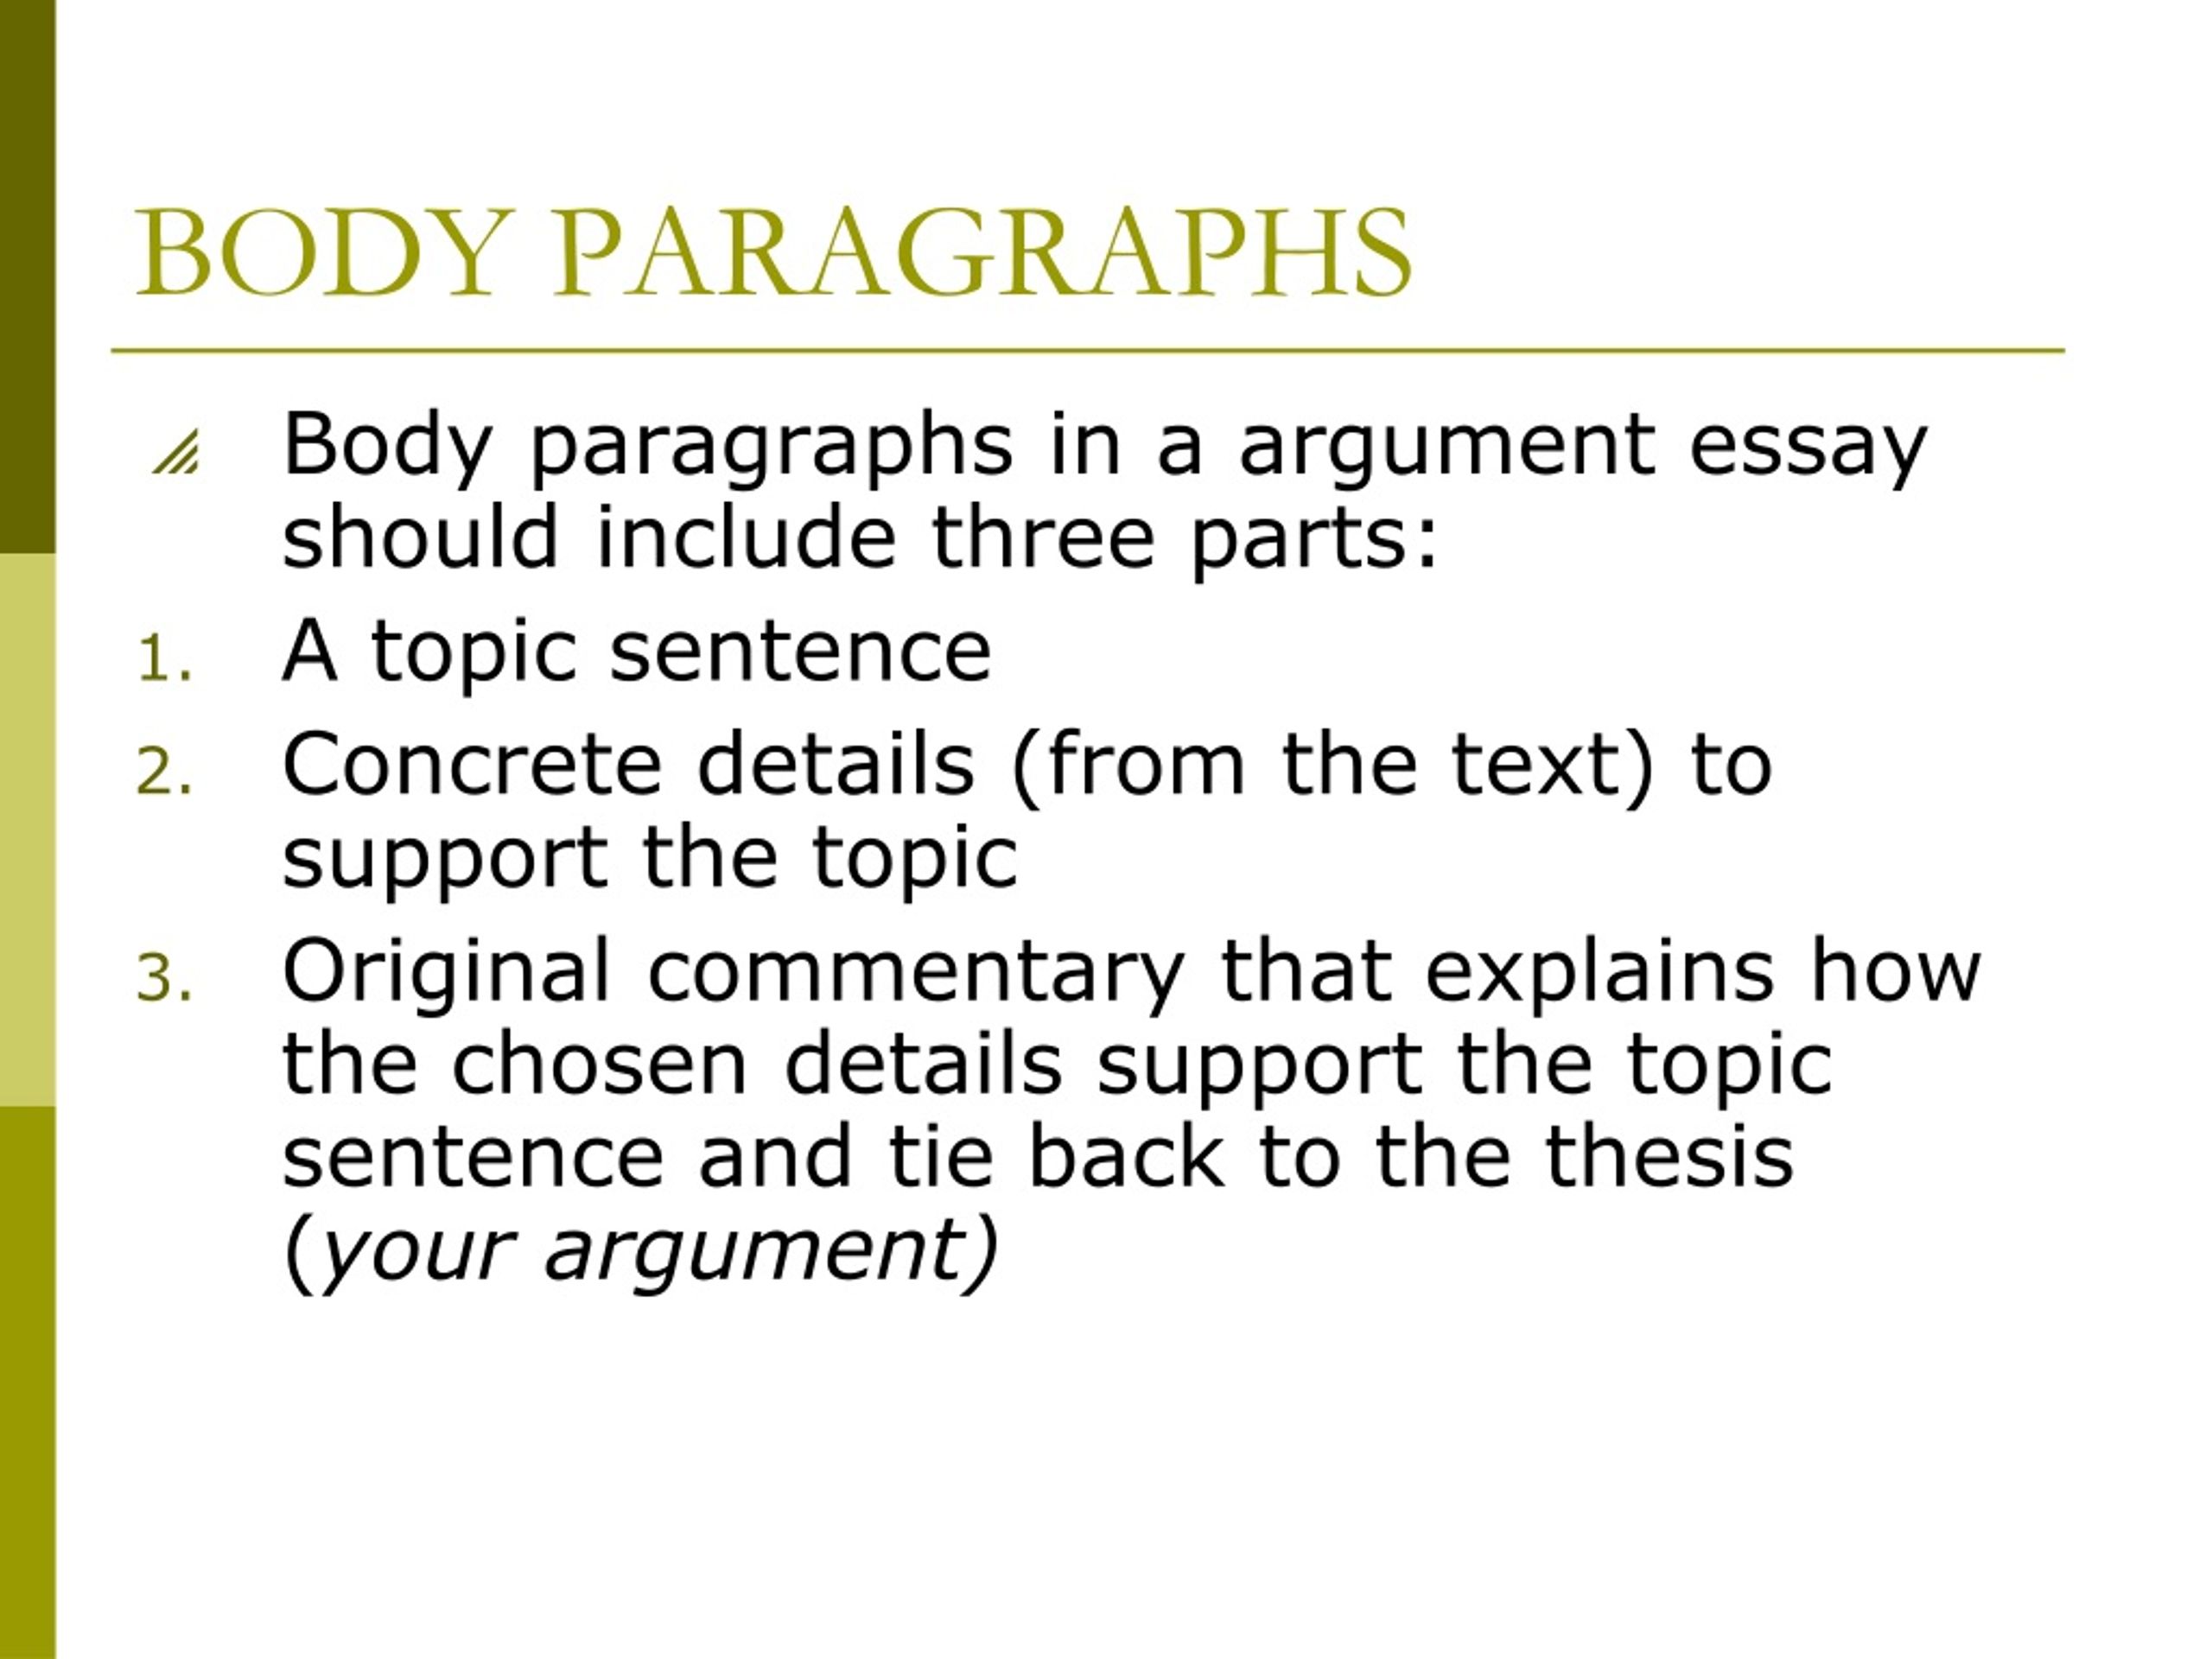 PPT - BODY PARAGRAPHS PowerPoint Presentation, free download - ID:9132011